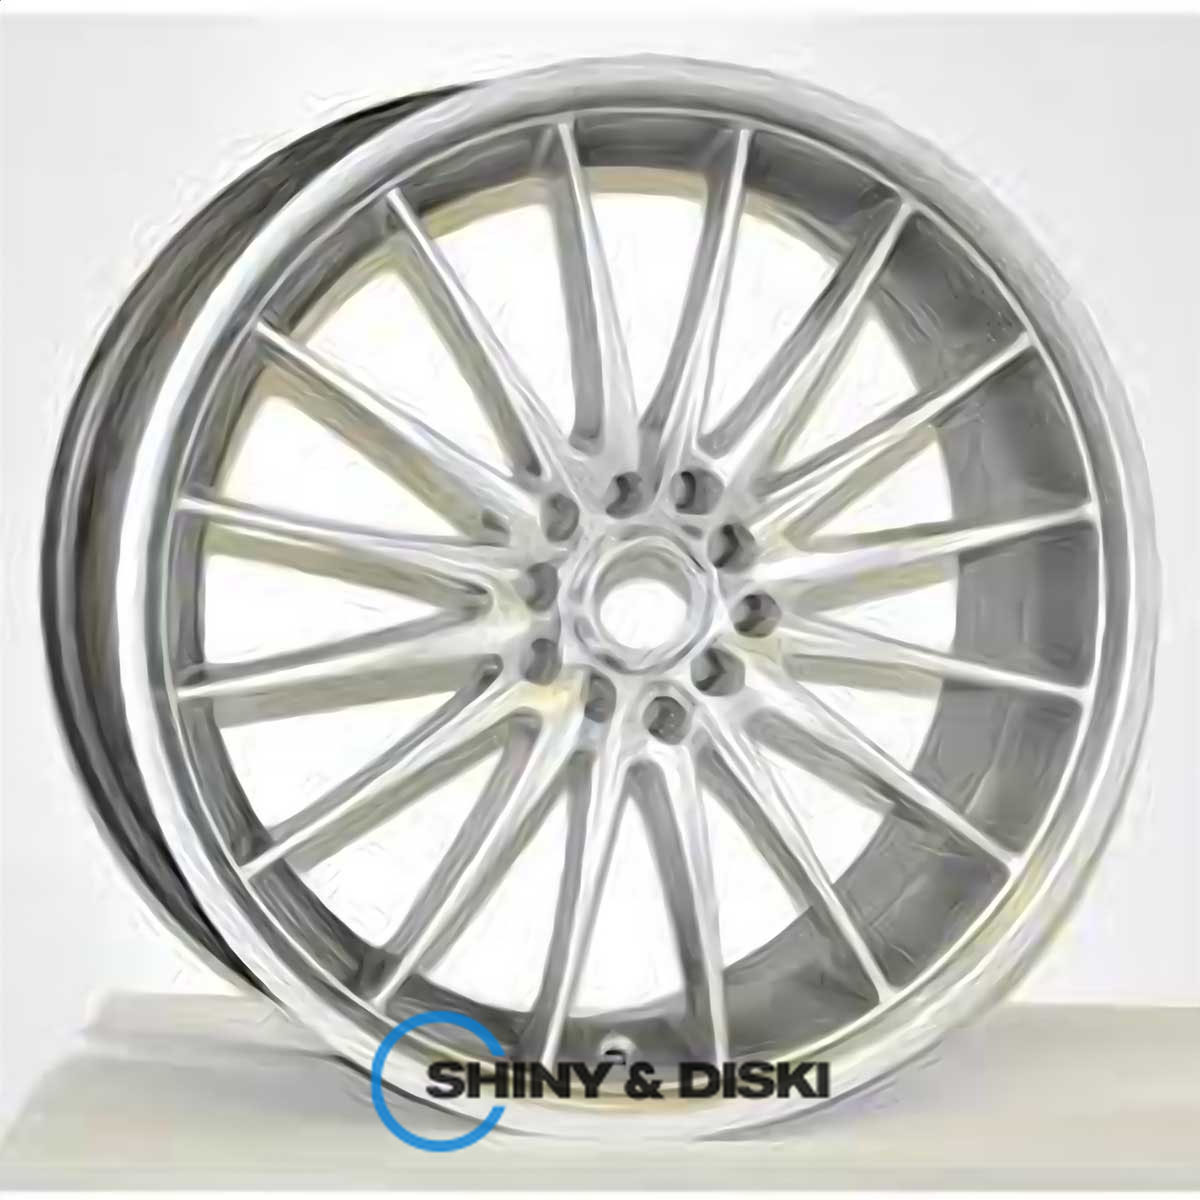 rs tuning 702 hs r15 w6.5 pcd5x100 et38 dia57.1